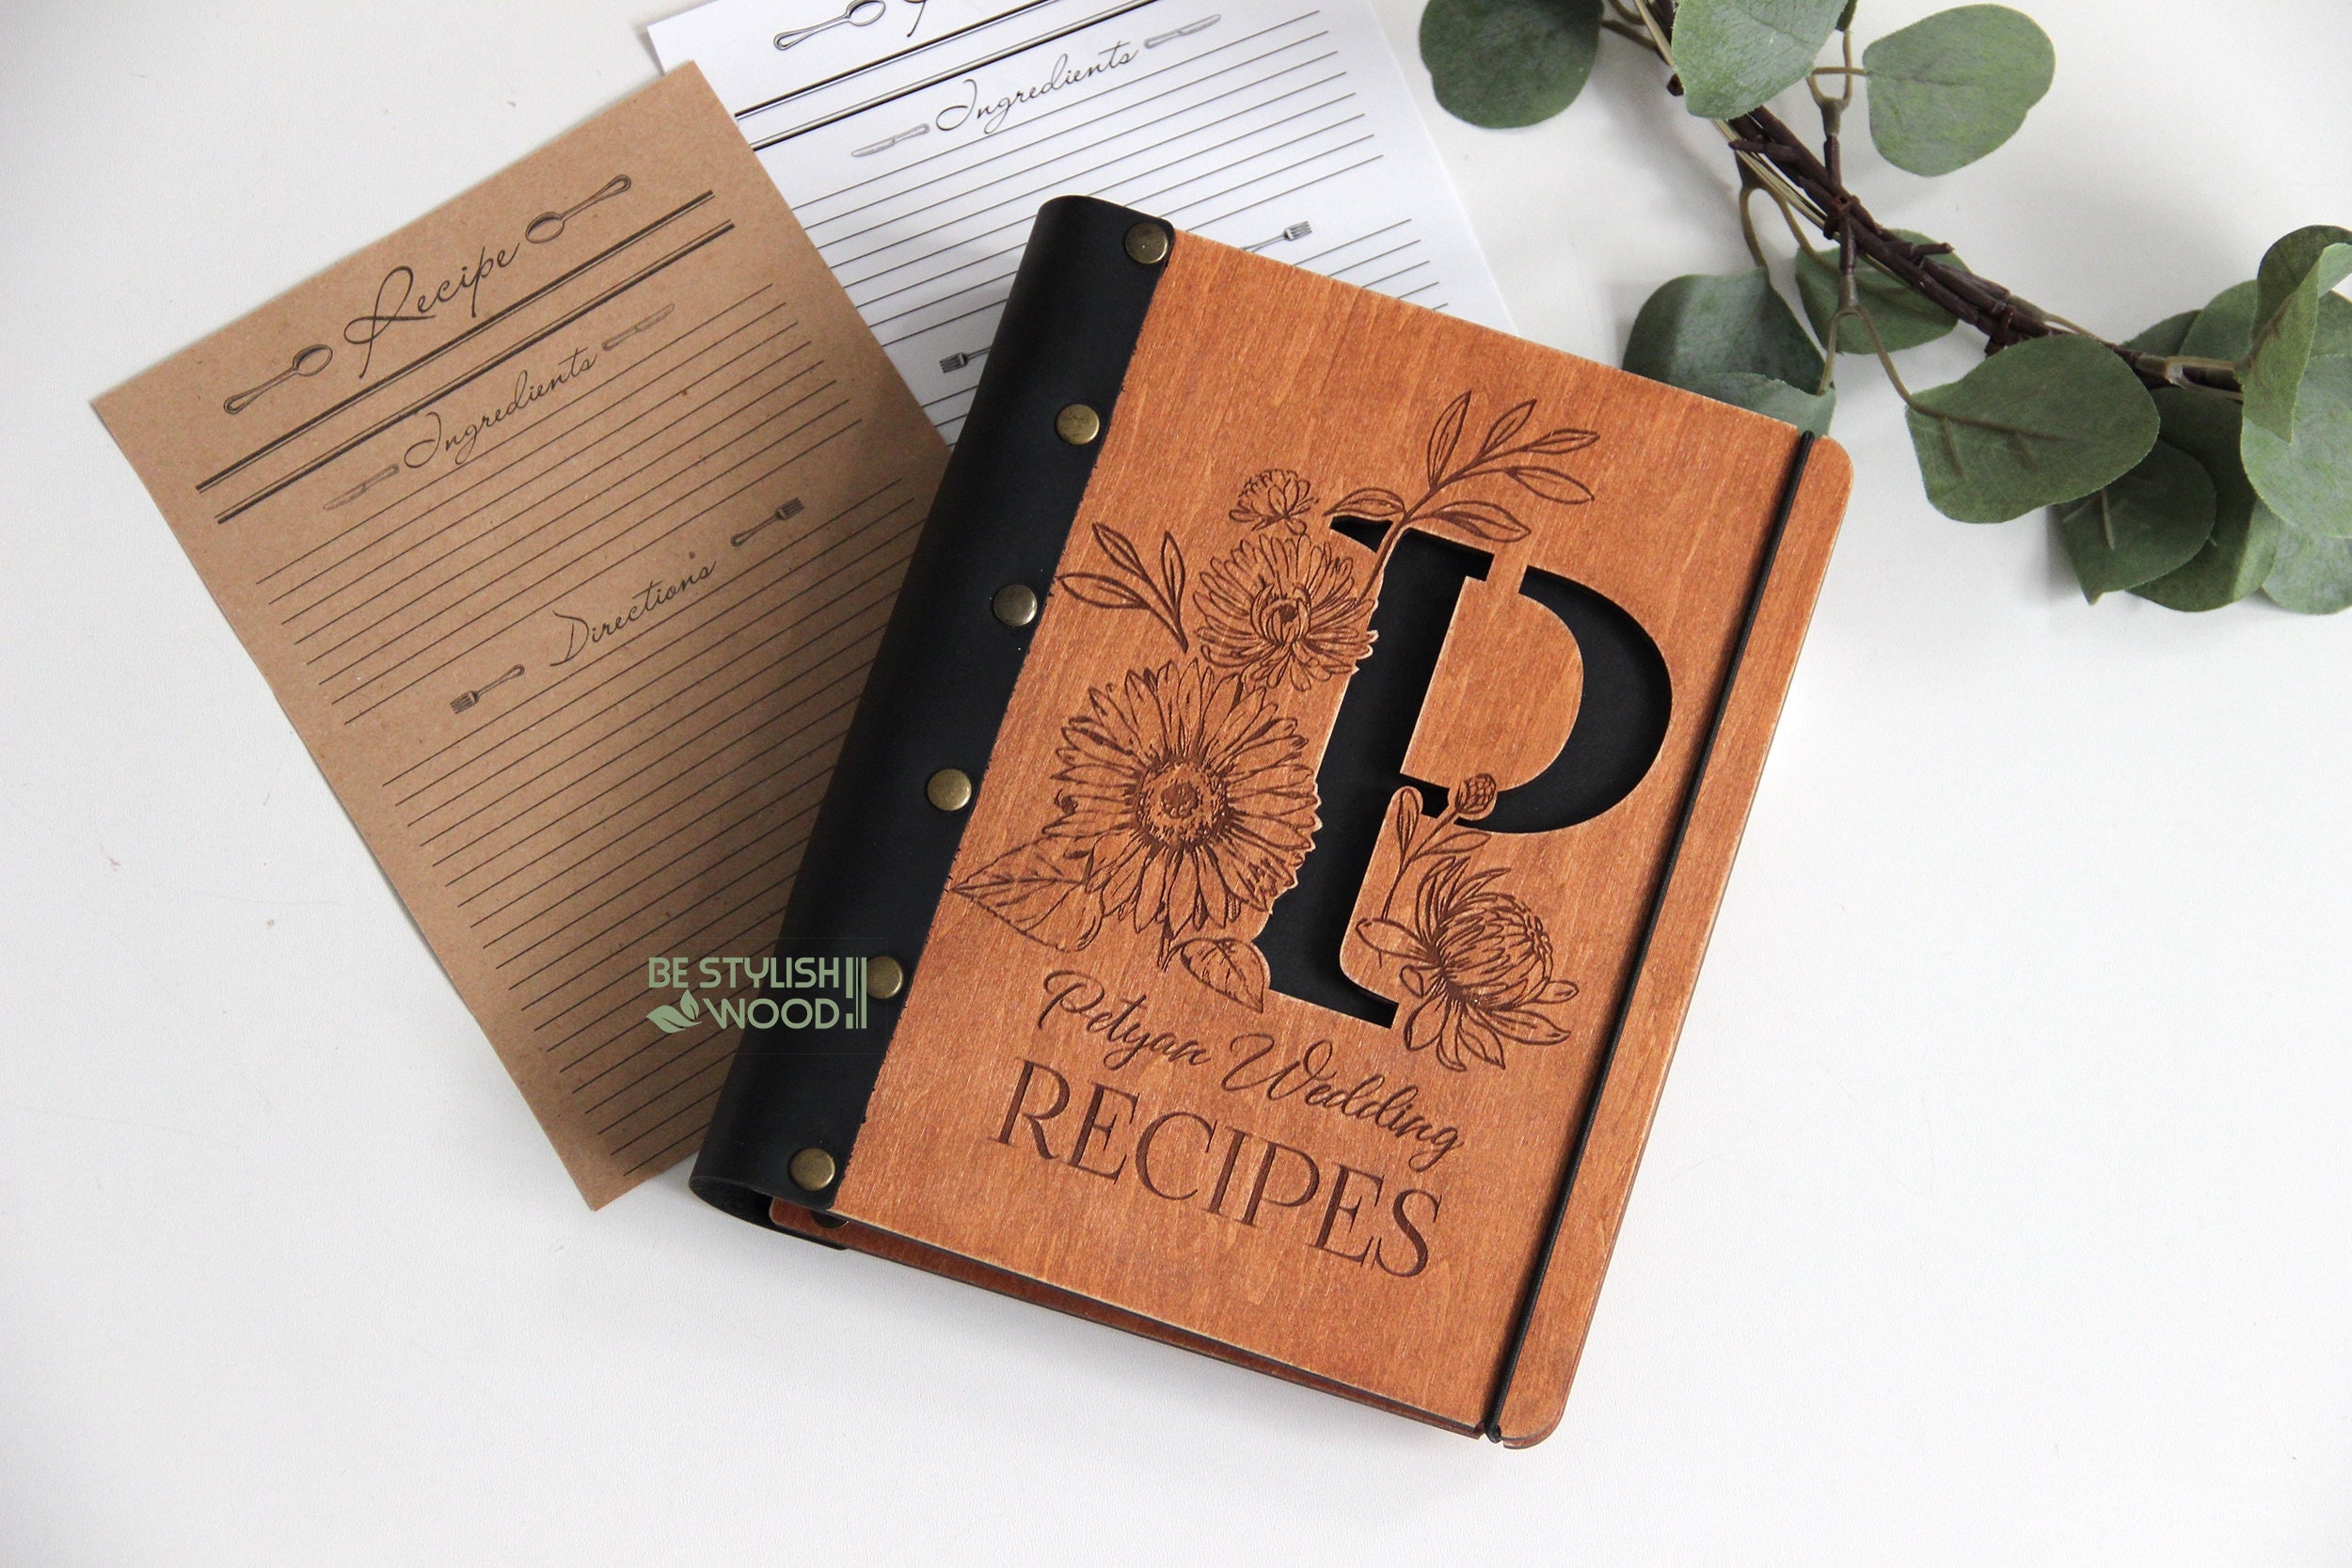 Write Your Own 228 Recipes Personalized Recipe Book With Measurement Page.  Custom Gift for Birthday, Gift for Friend, Gift for Mom and Dad 